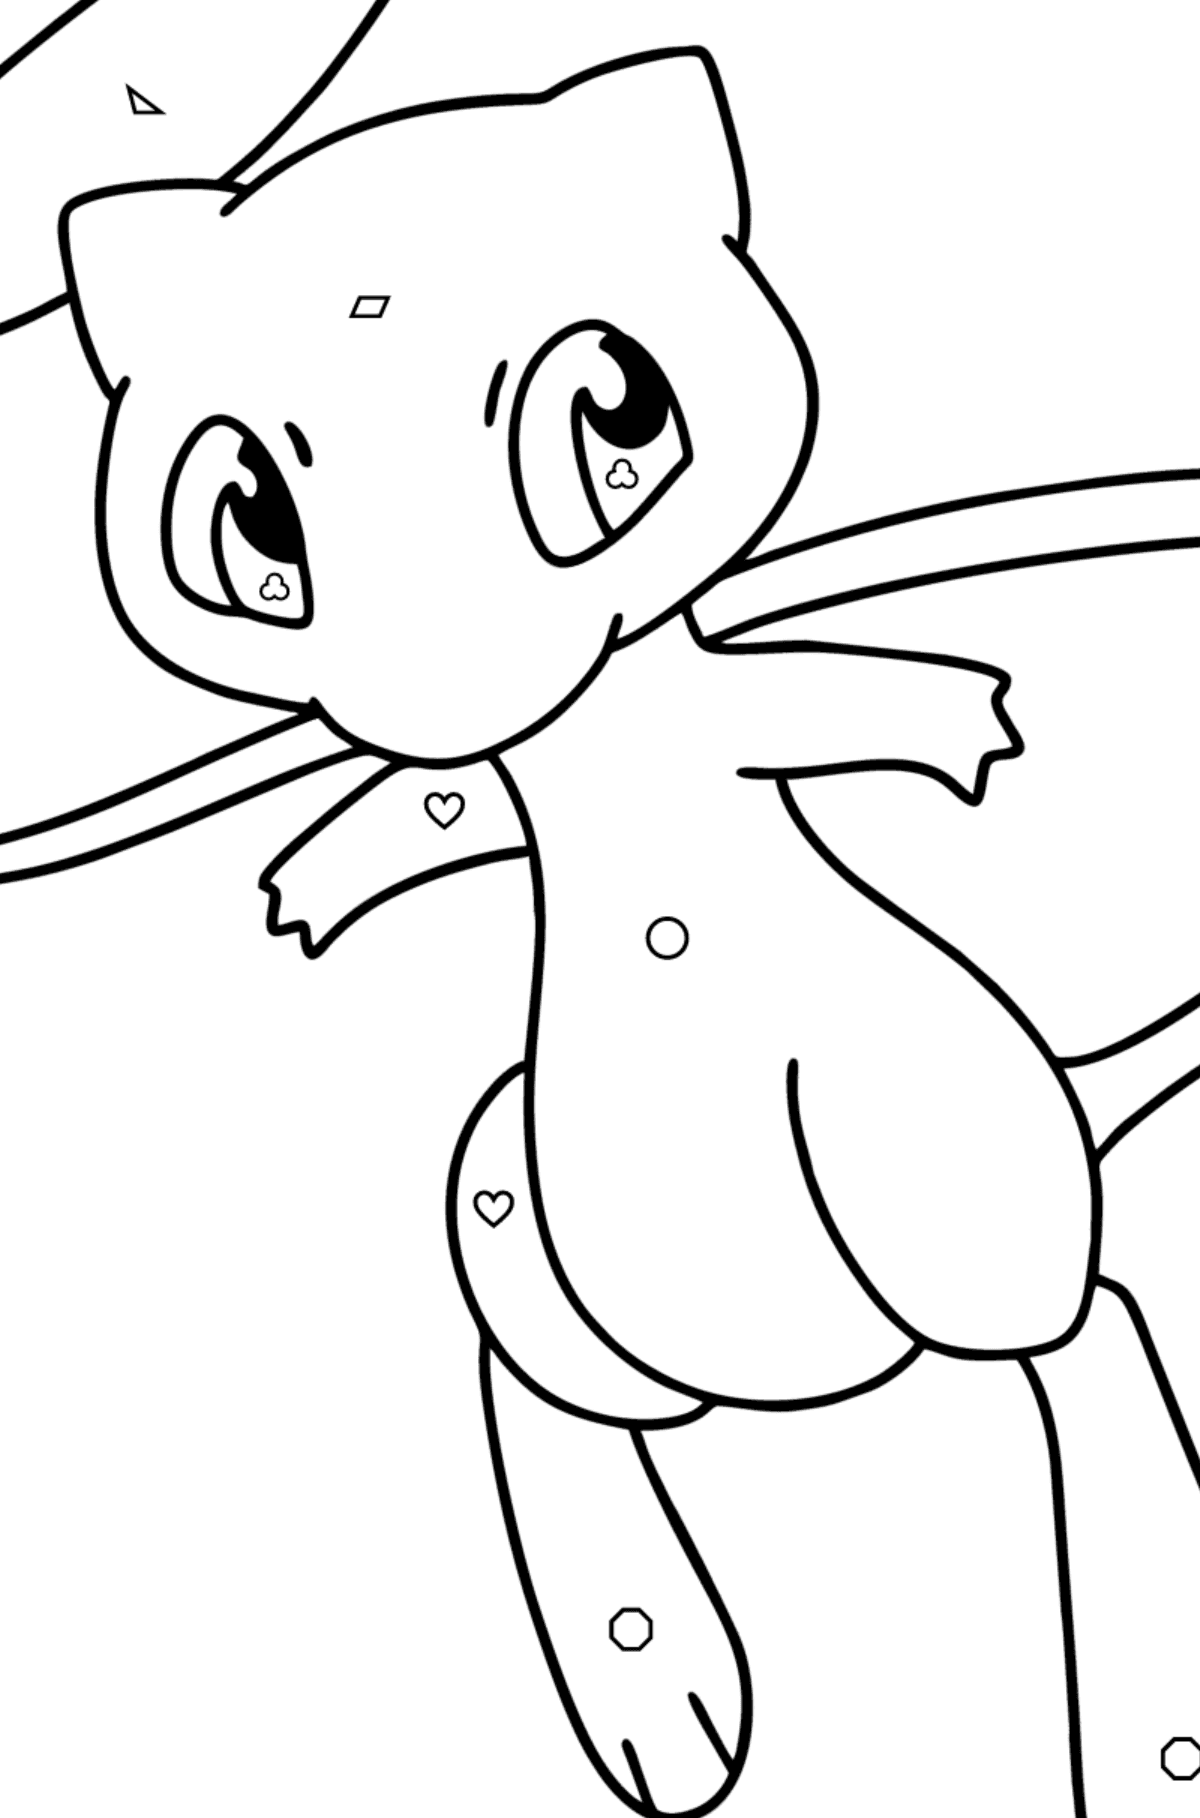 Coloring page Pokemon Go Mew - Coloring by Geometric Shapes for Kids